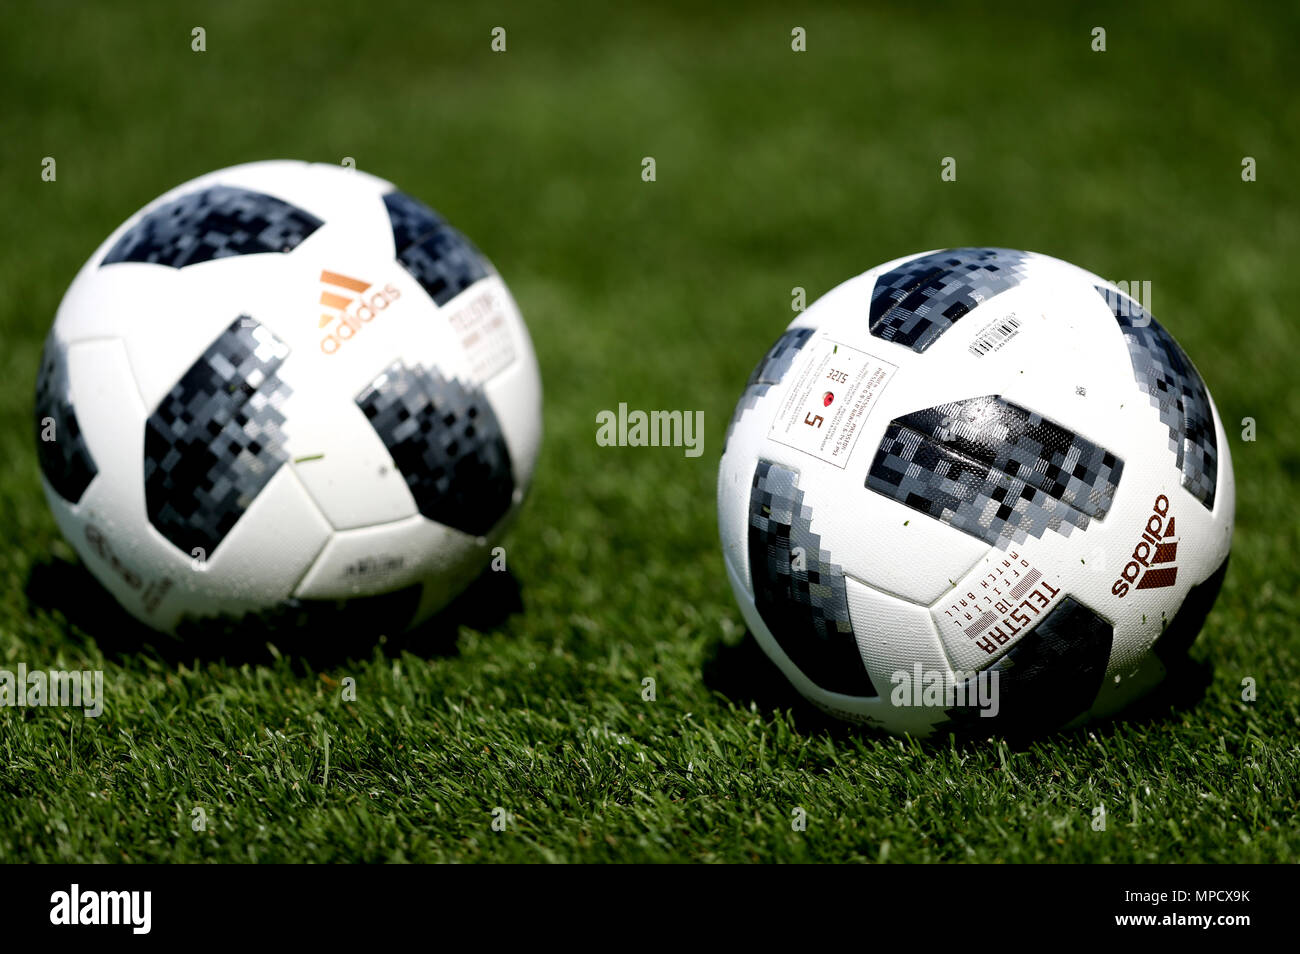 Adidas telstar football High Resolution Stock Photography and Images - Alamy